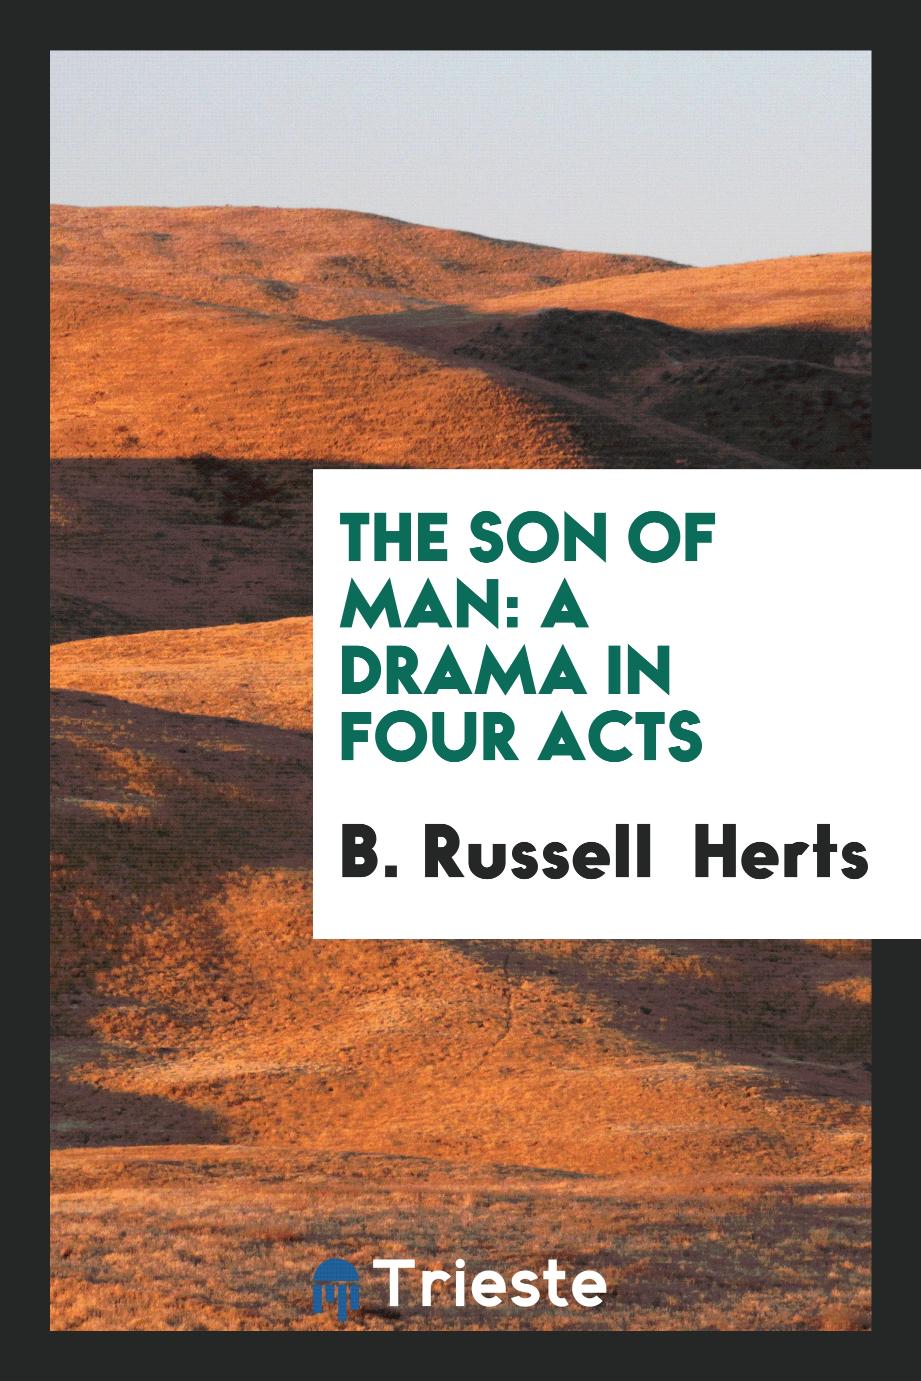 The Son of Man: A Drama in Four Acts